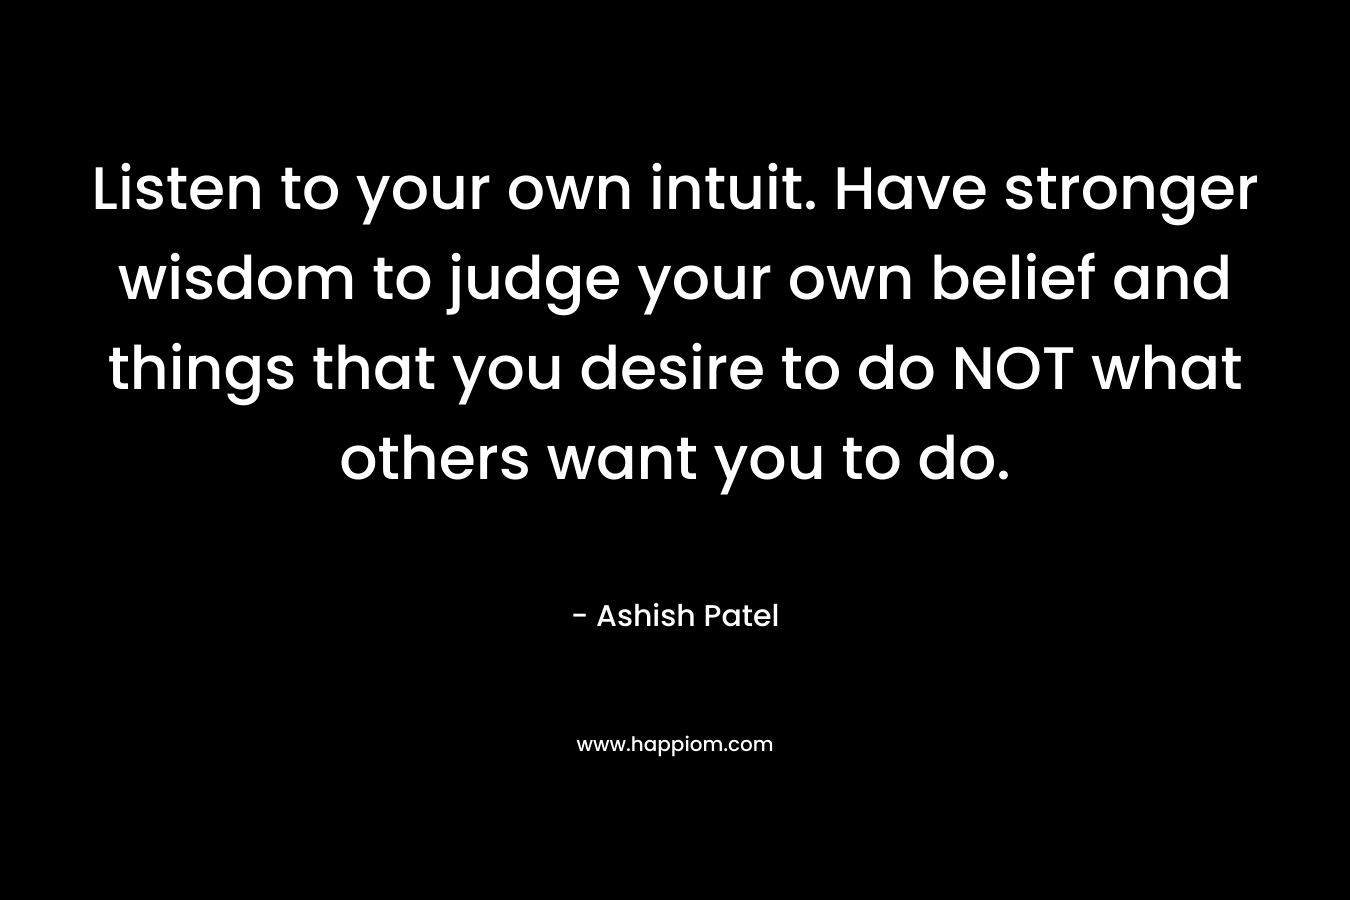 Listen to your own intuit. Have stronger wisdom to judge your own belief and things that you desire to do NOT what others want you to do. – Ashish Patel